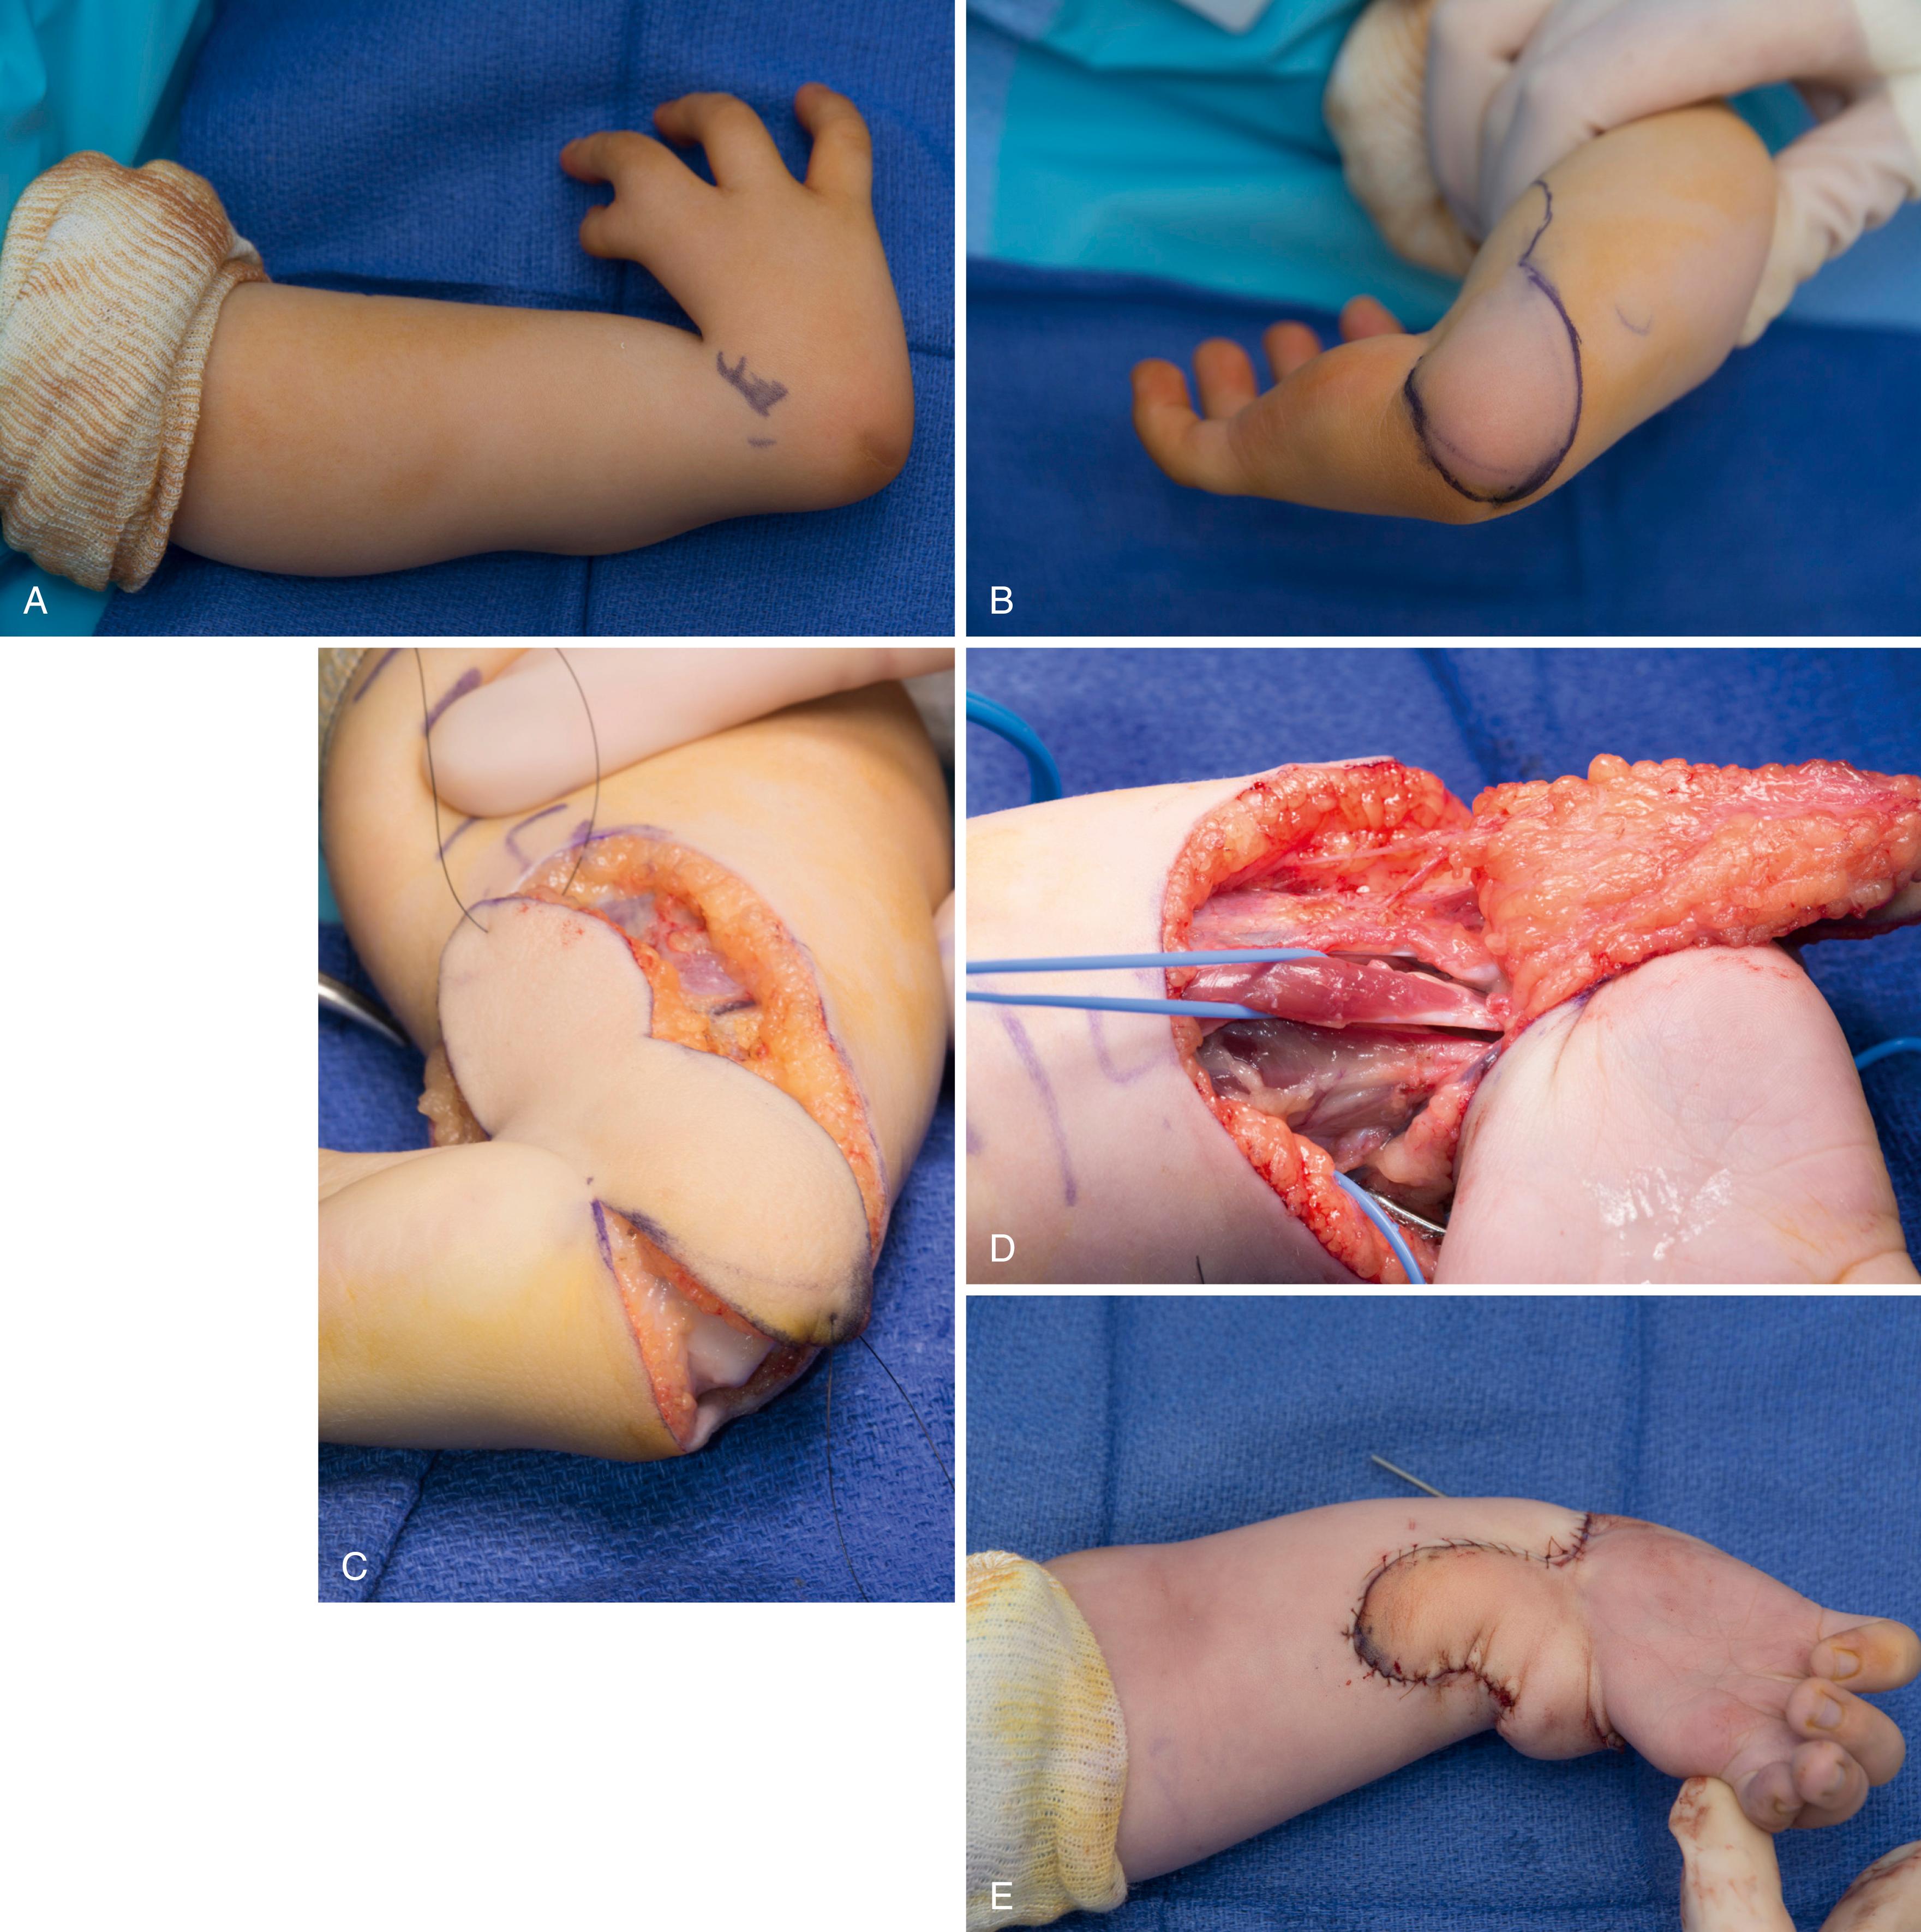 Fig. 38.7, Intraoperative photos of a volar bilobed flap and soft tissue rebalancing for severe radius deficiency. A, Preoperative photo demonstrating significant radial deviation. B, Volar/ulnar view of the wrist with bilobed flap incision marked. C, The flap has been raised. D, The volar flap allows for wide exposure to perform tendon releases and/or transfers as needed. E, Postoperative appearance. A Steinman pin is placed to allow soft tissue rest and prevent flap necrosis.